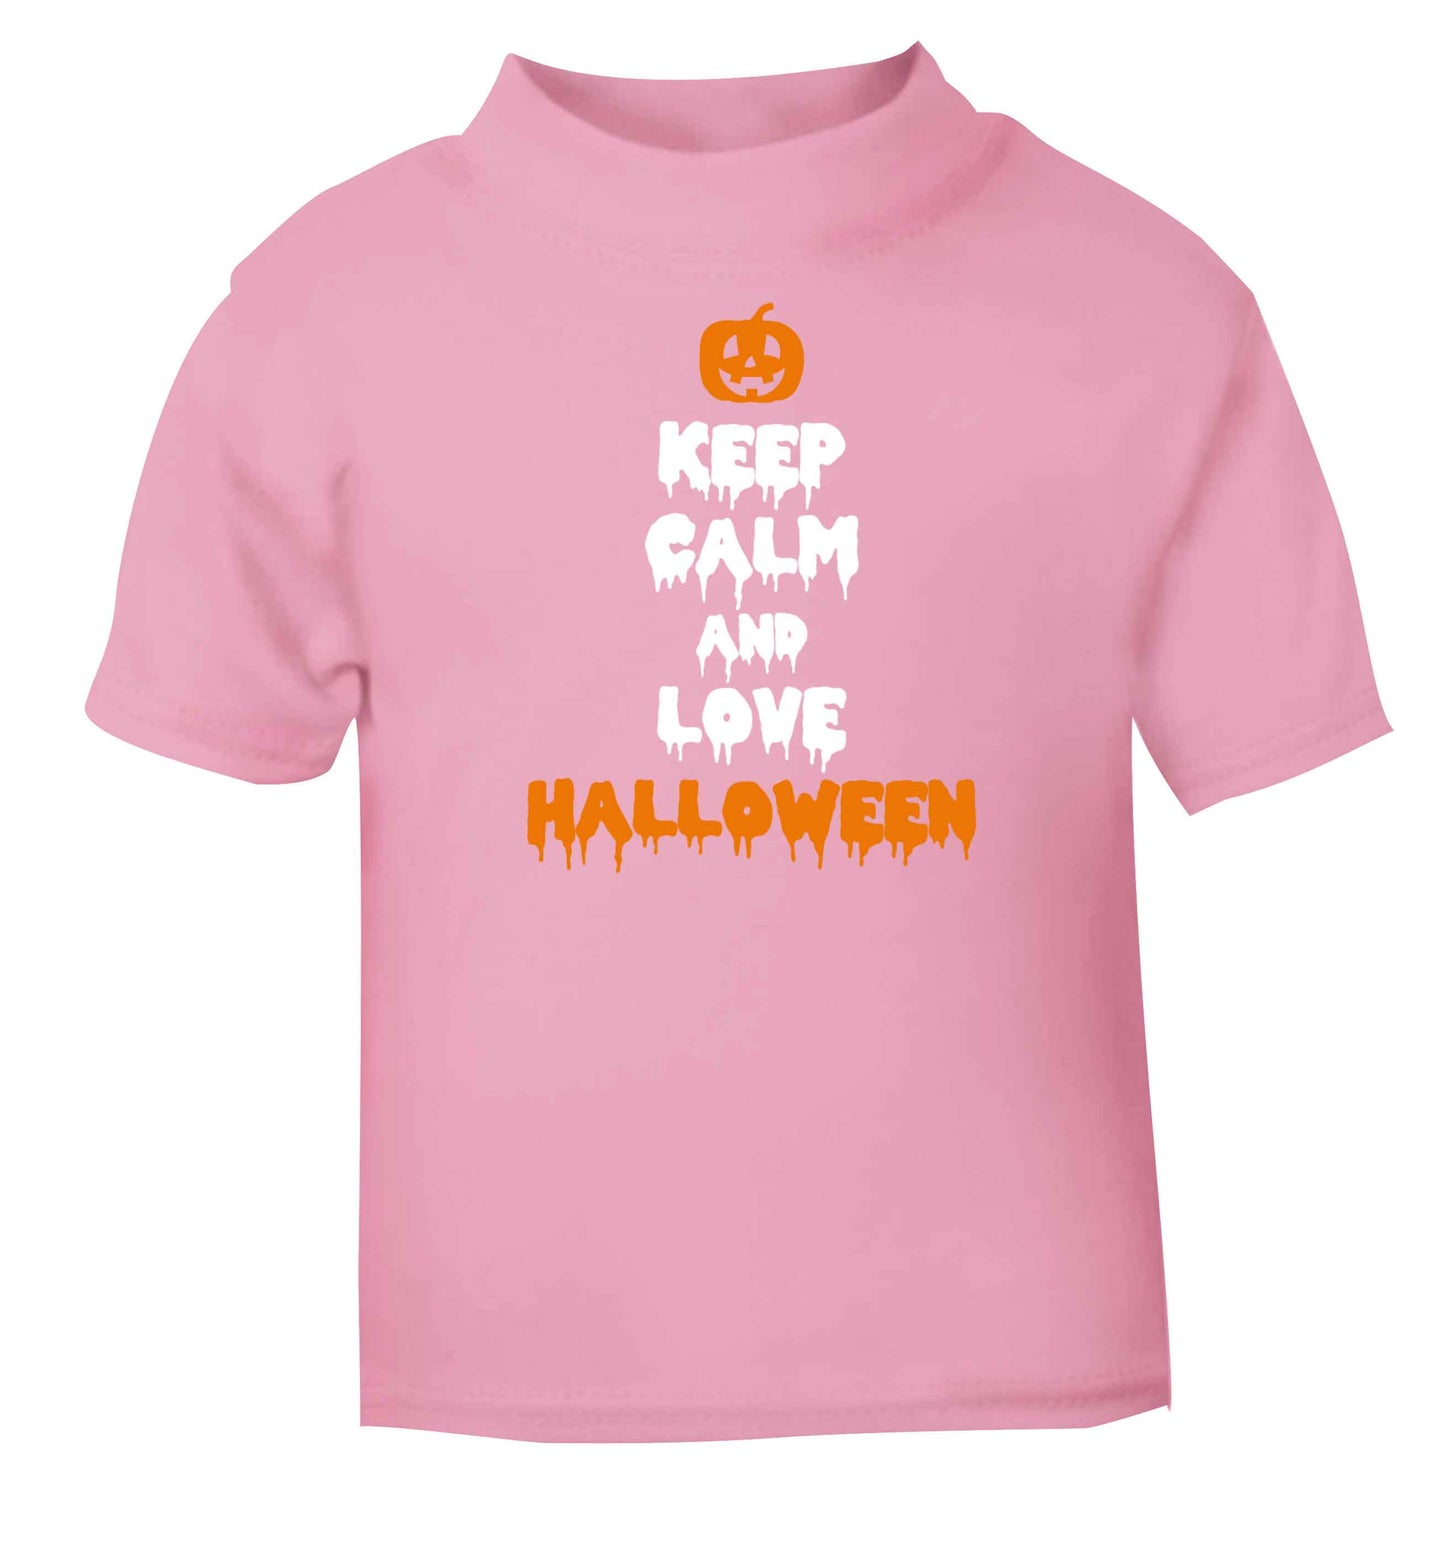 Keep calm and love halloween light pink baby toddler Tshirt 2 Years